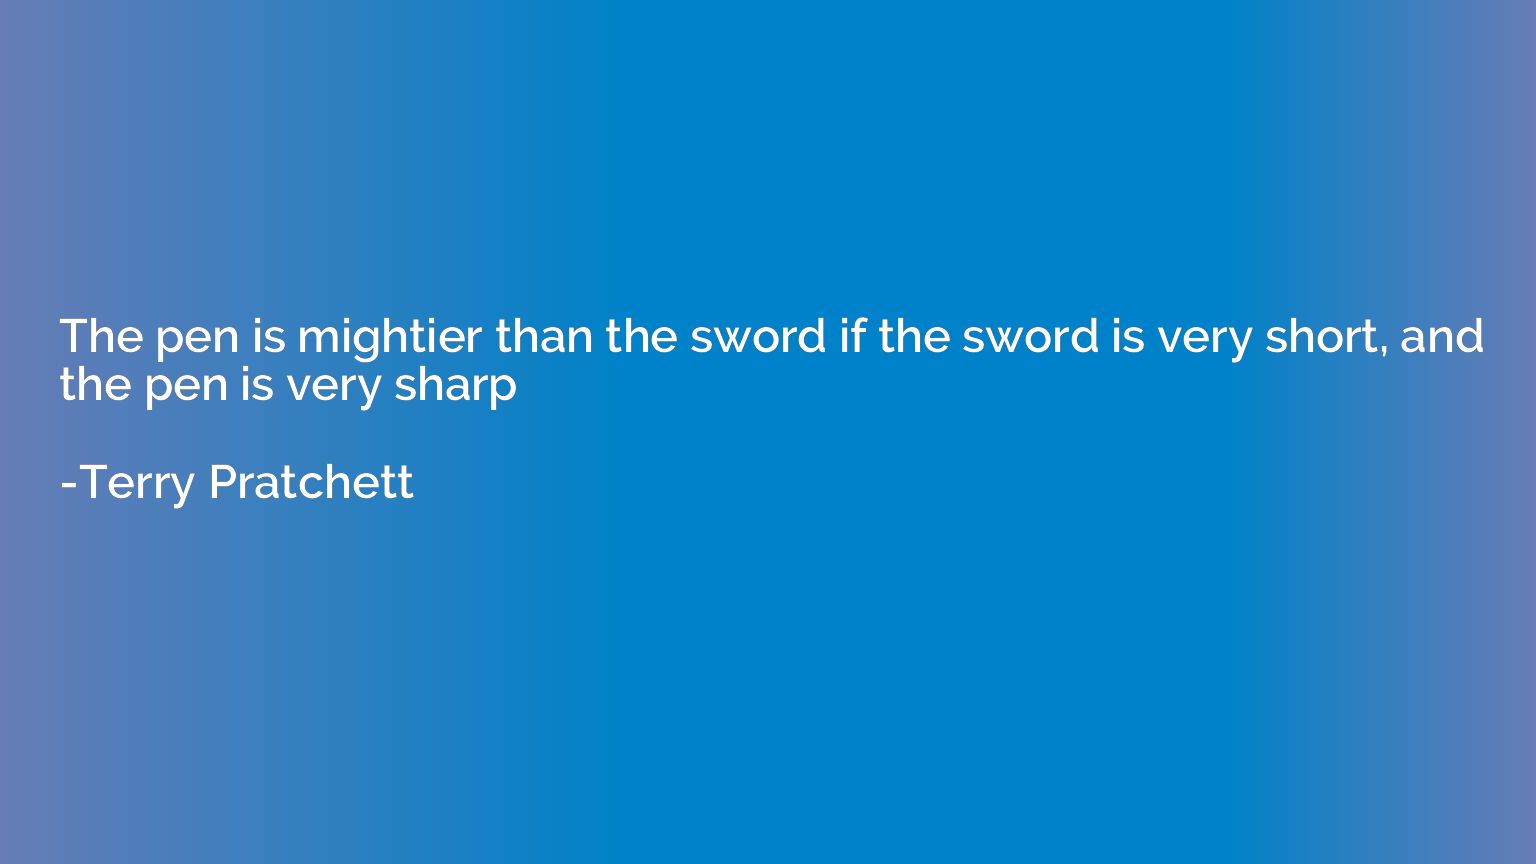 The pen is mightier than the sword if the sword is very shor